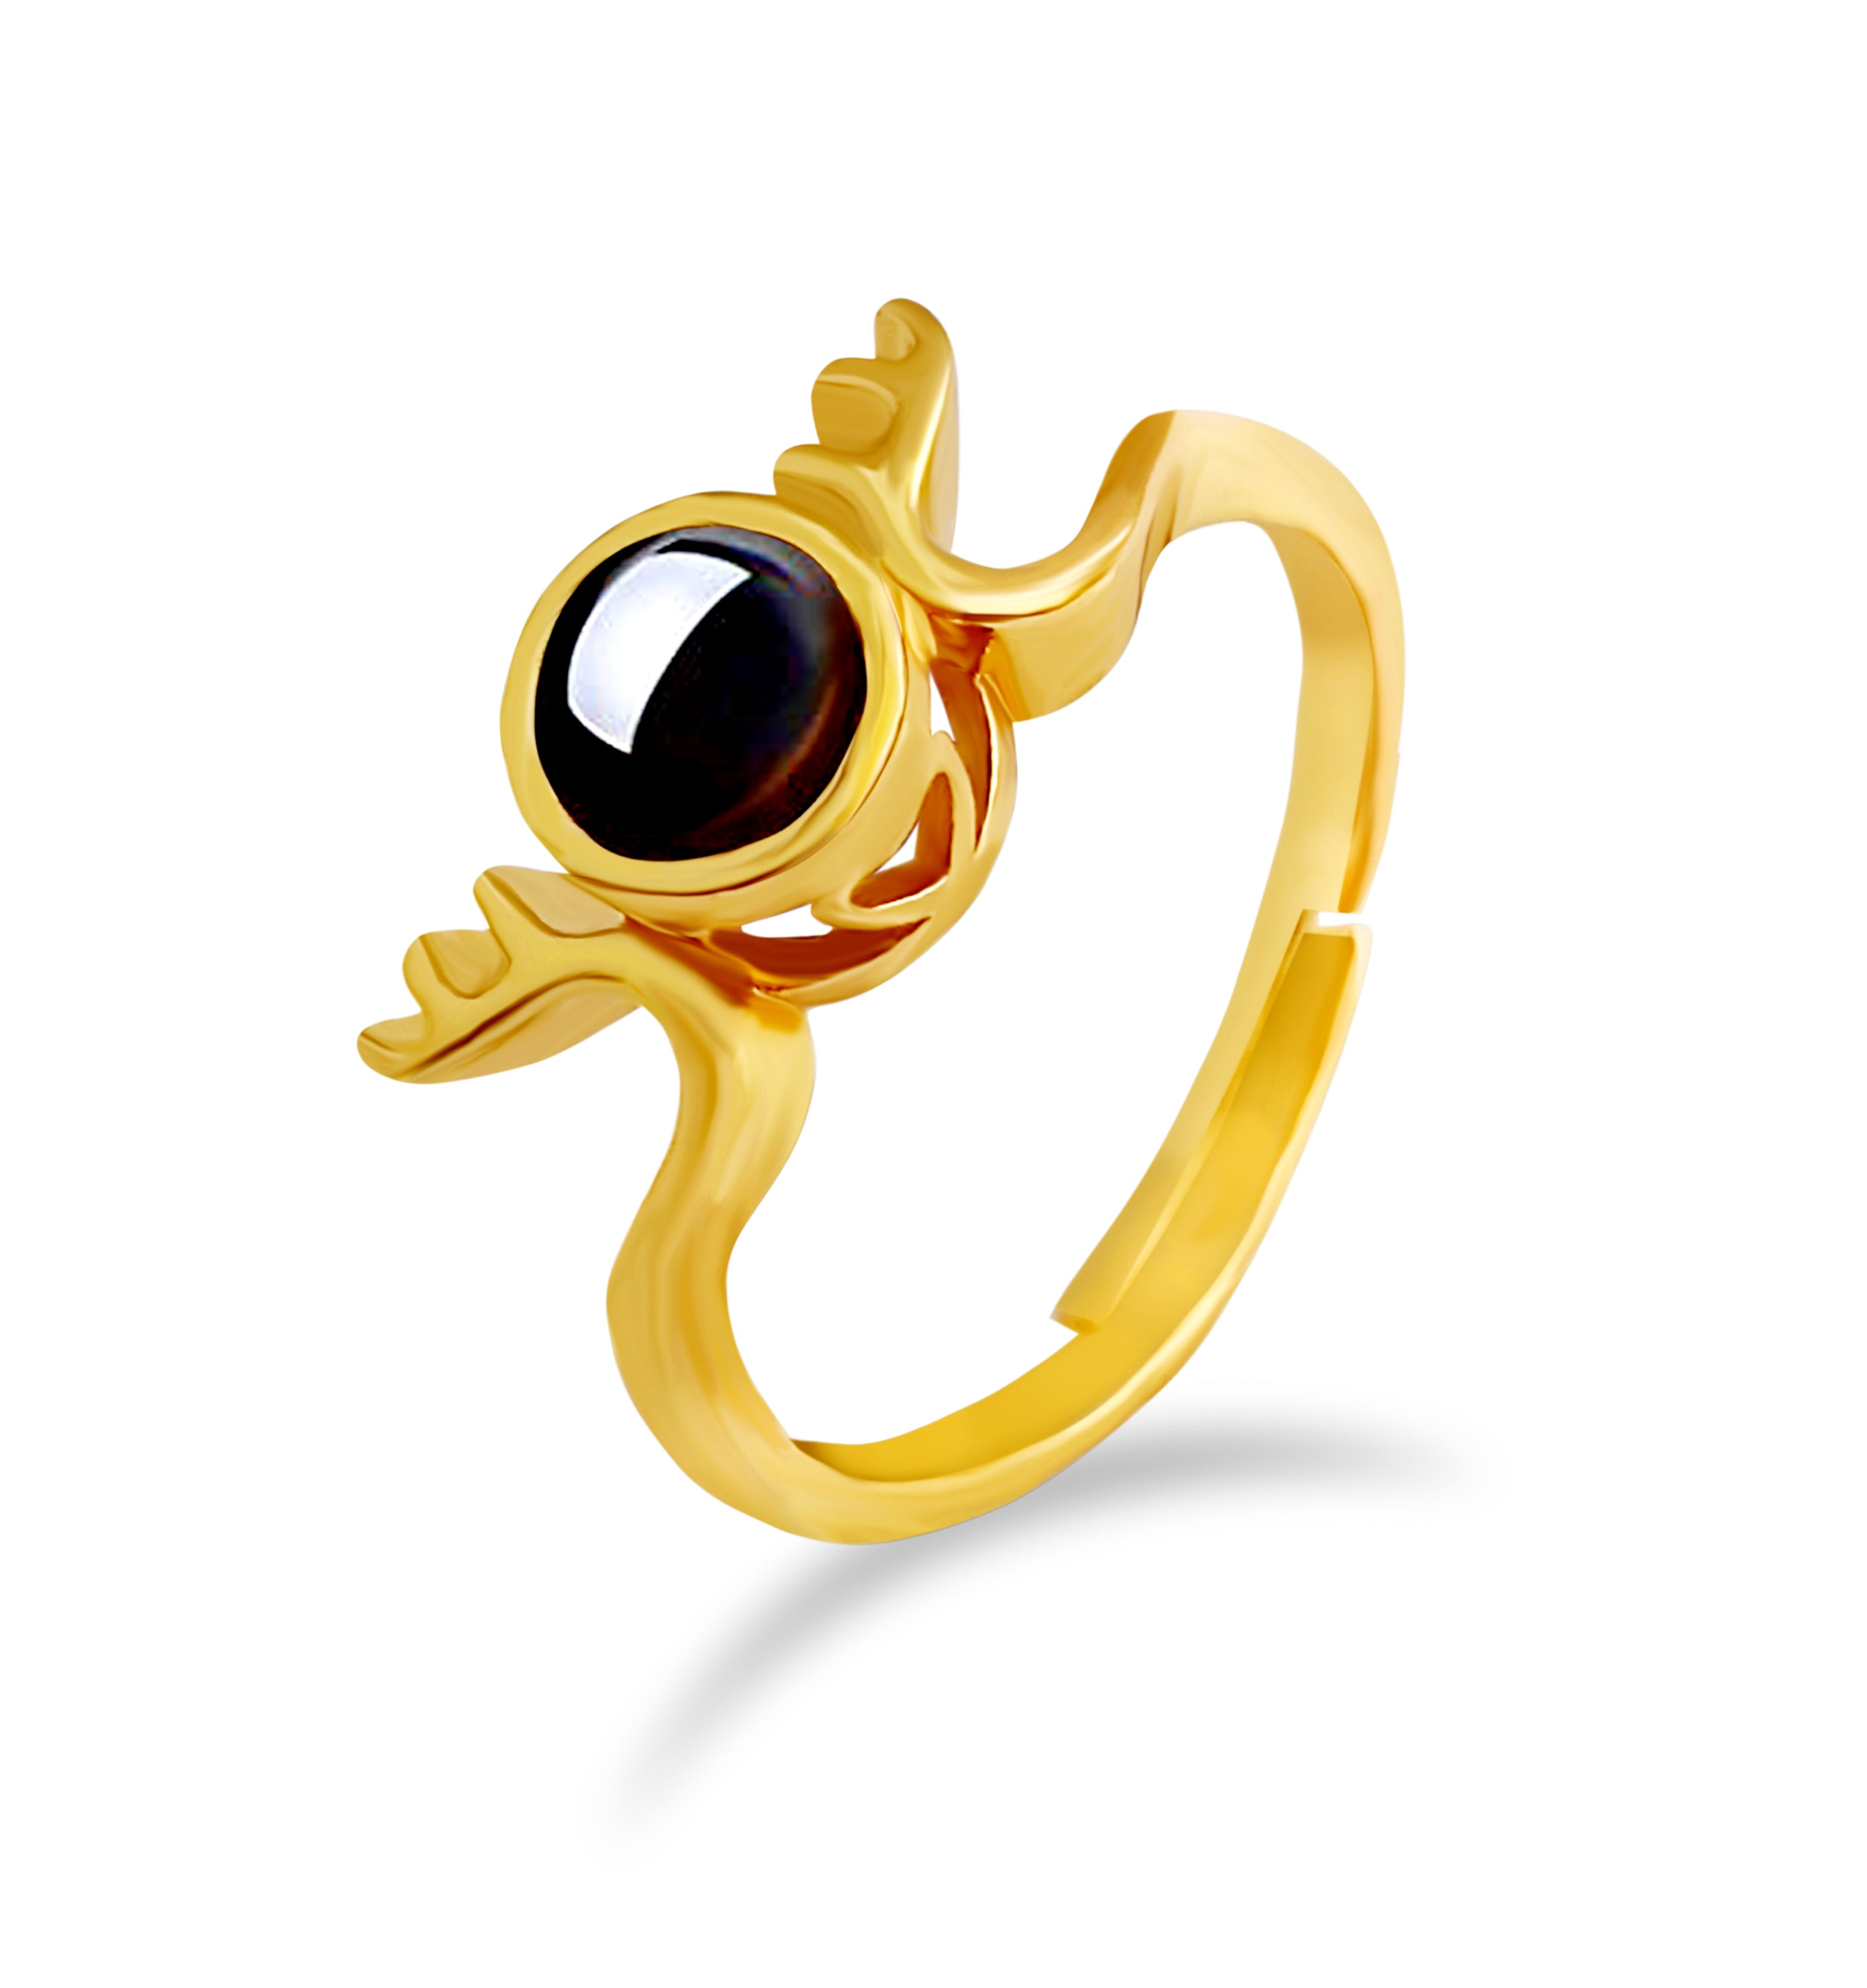 Urbana Gold Plated Single Adjustable Ring Reflecting I love you In 100 Languages